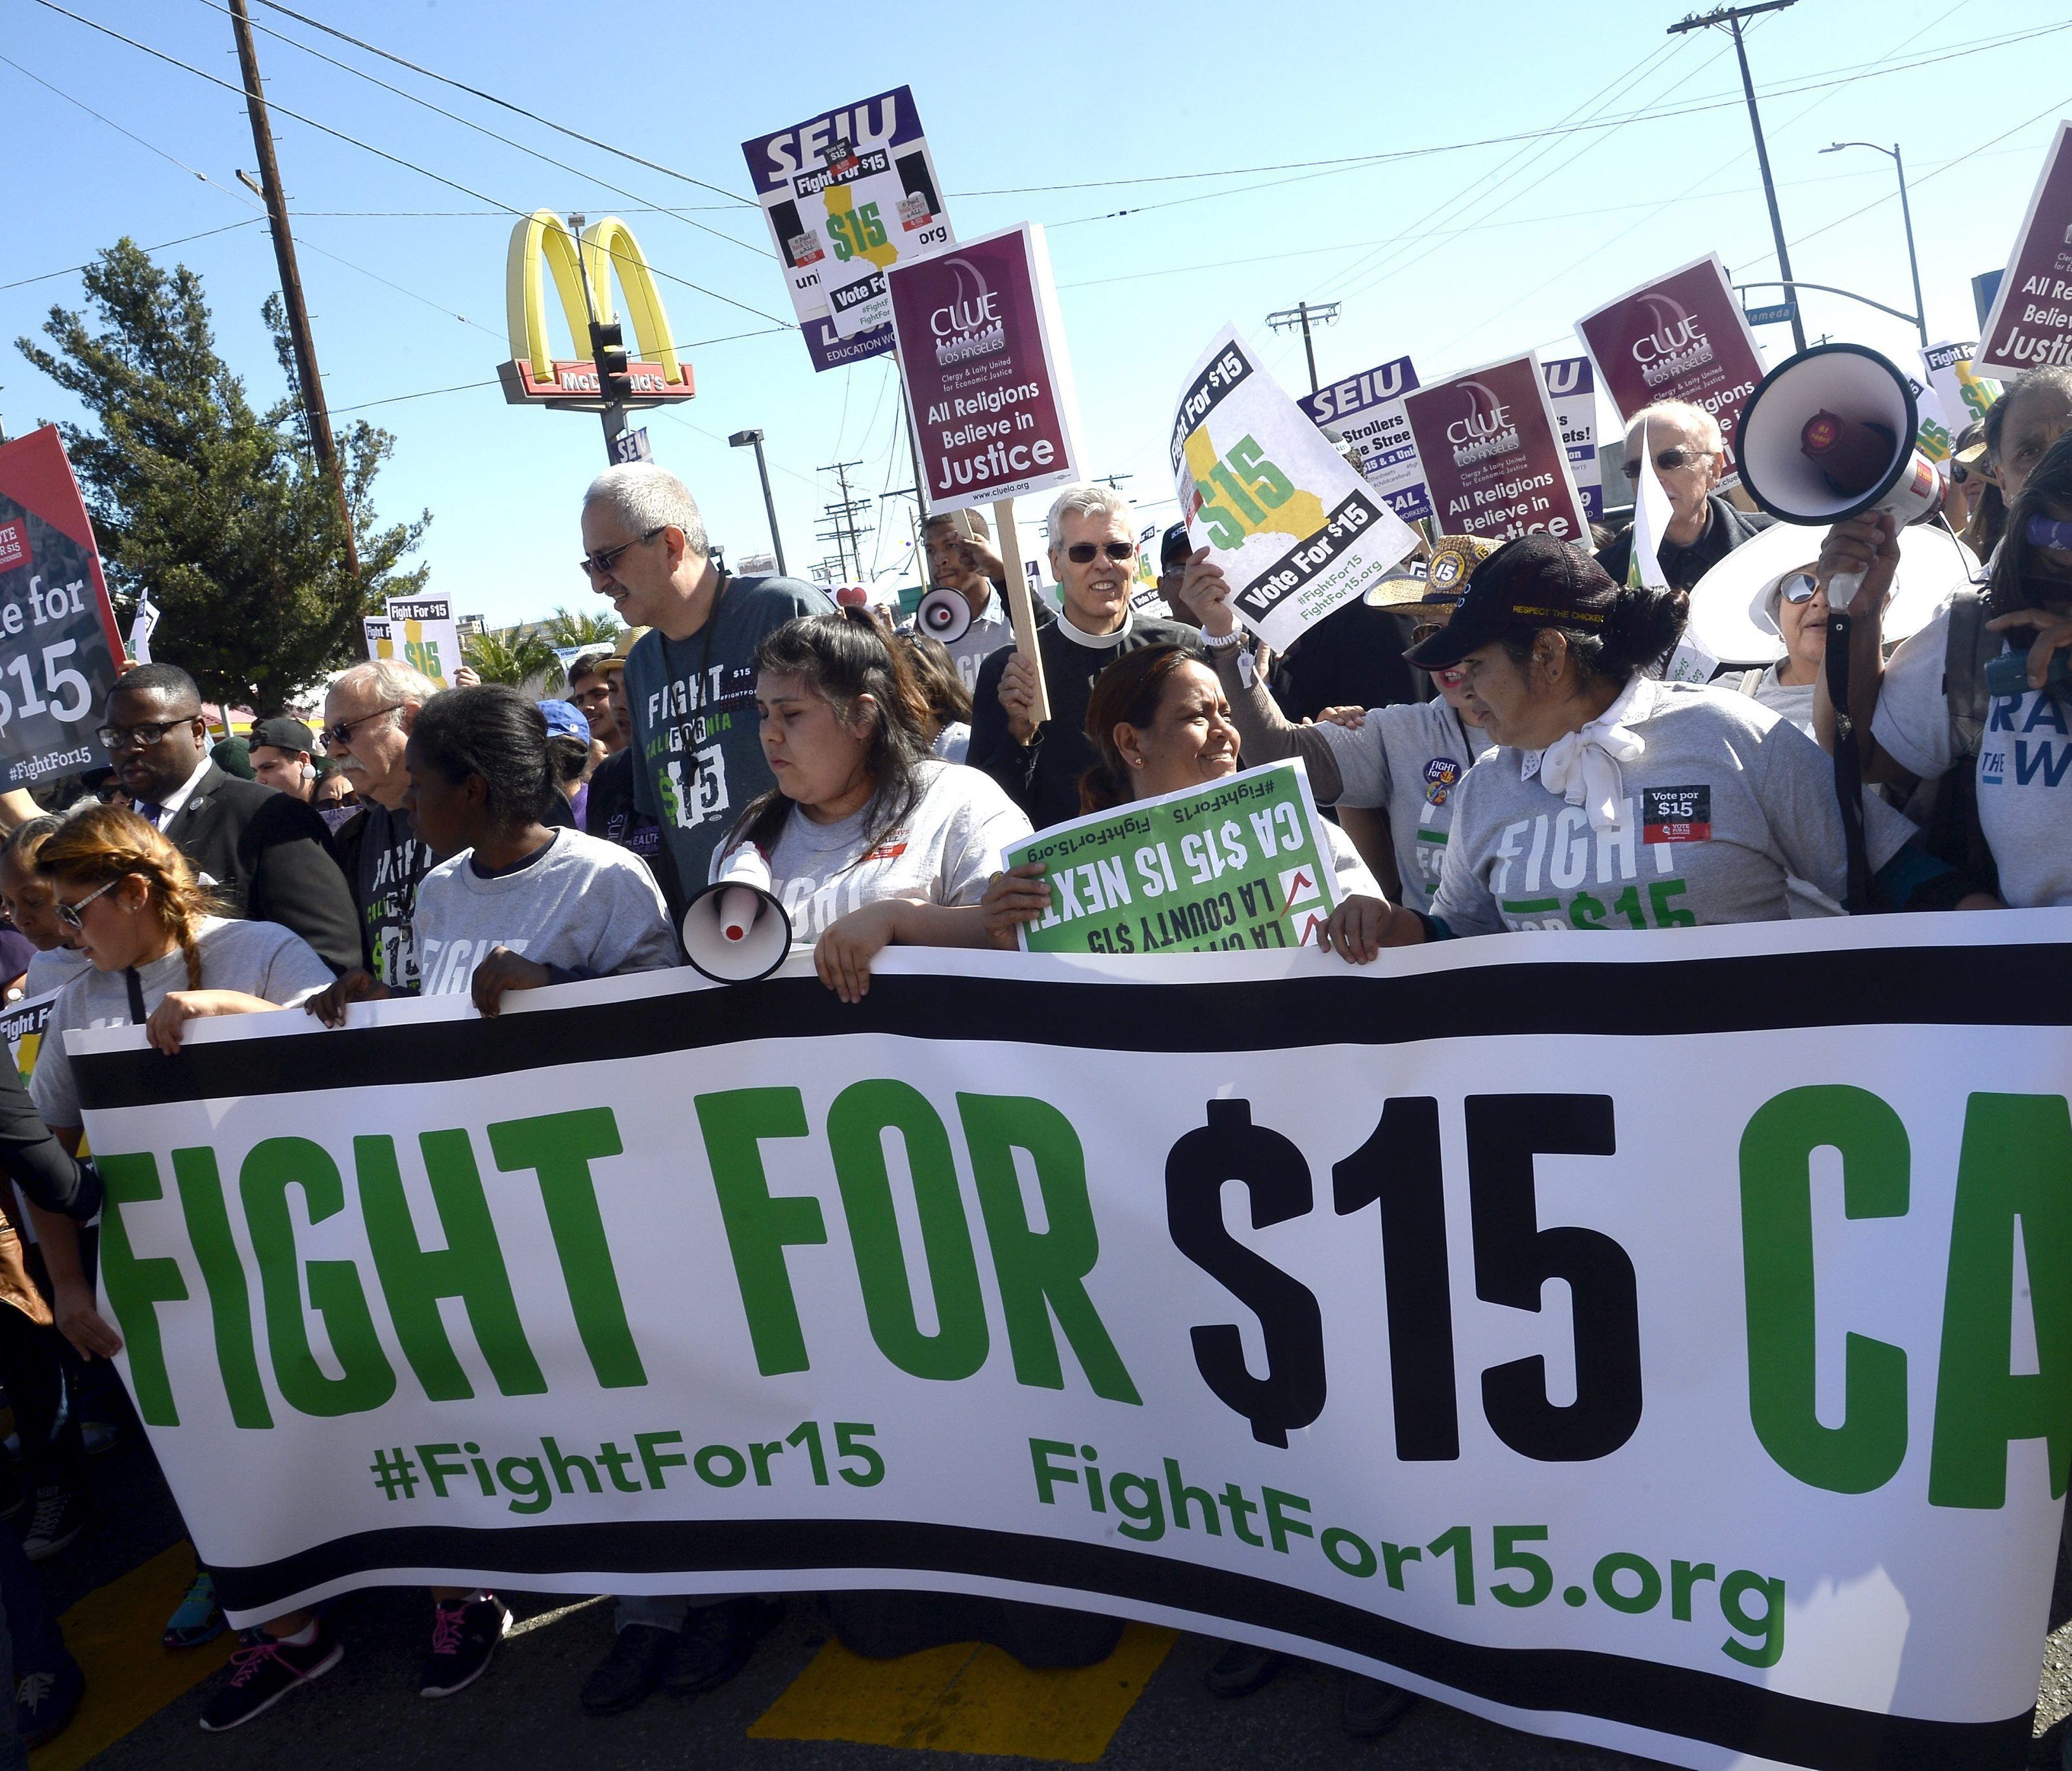 Fast-food workers have been demanding base pay of $15 an hour.